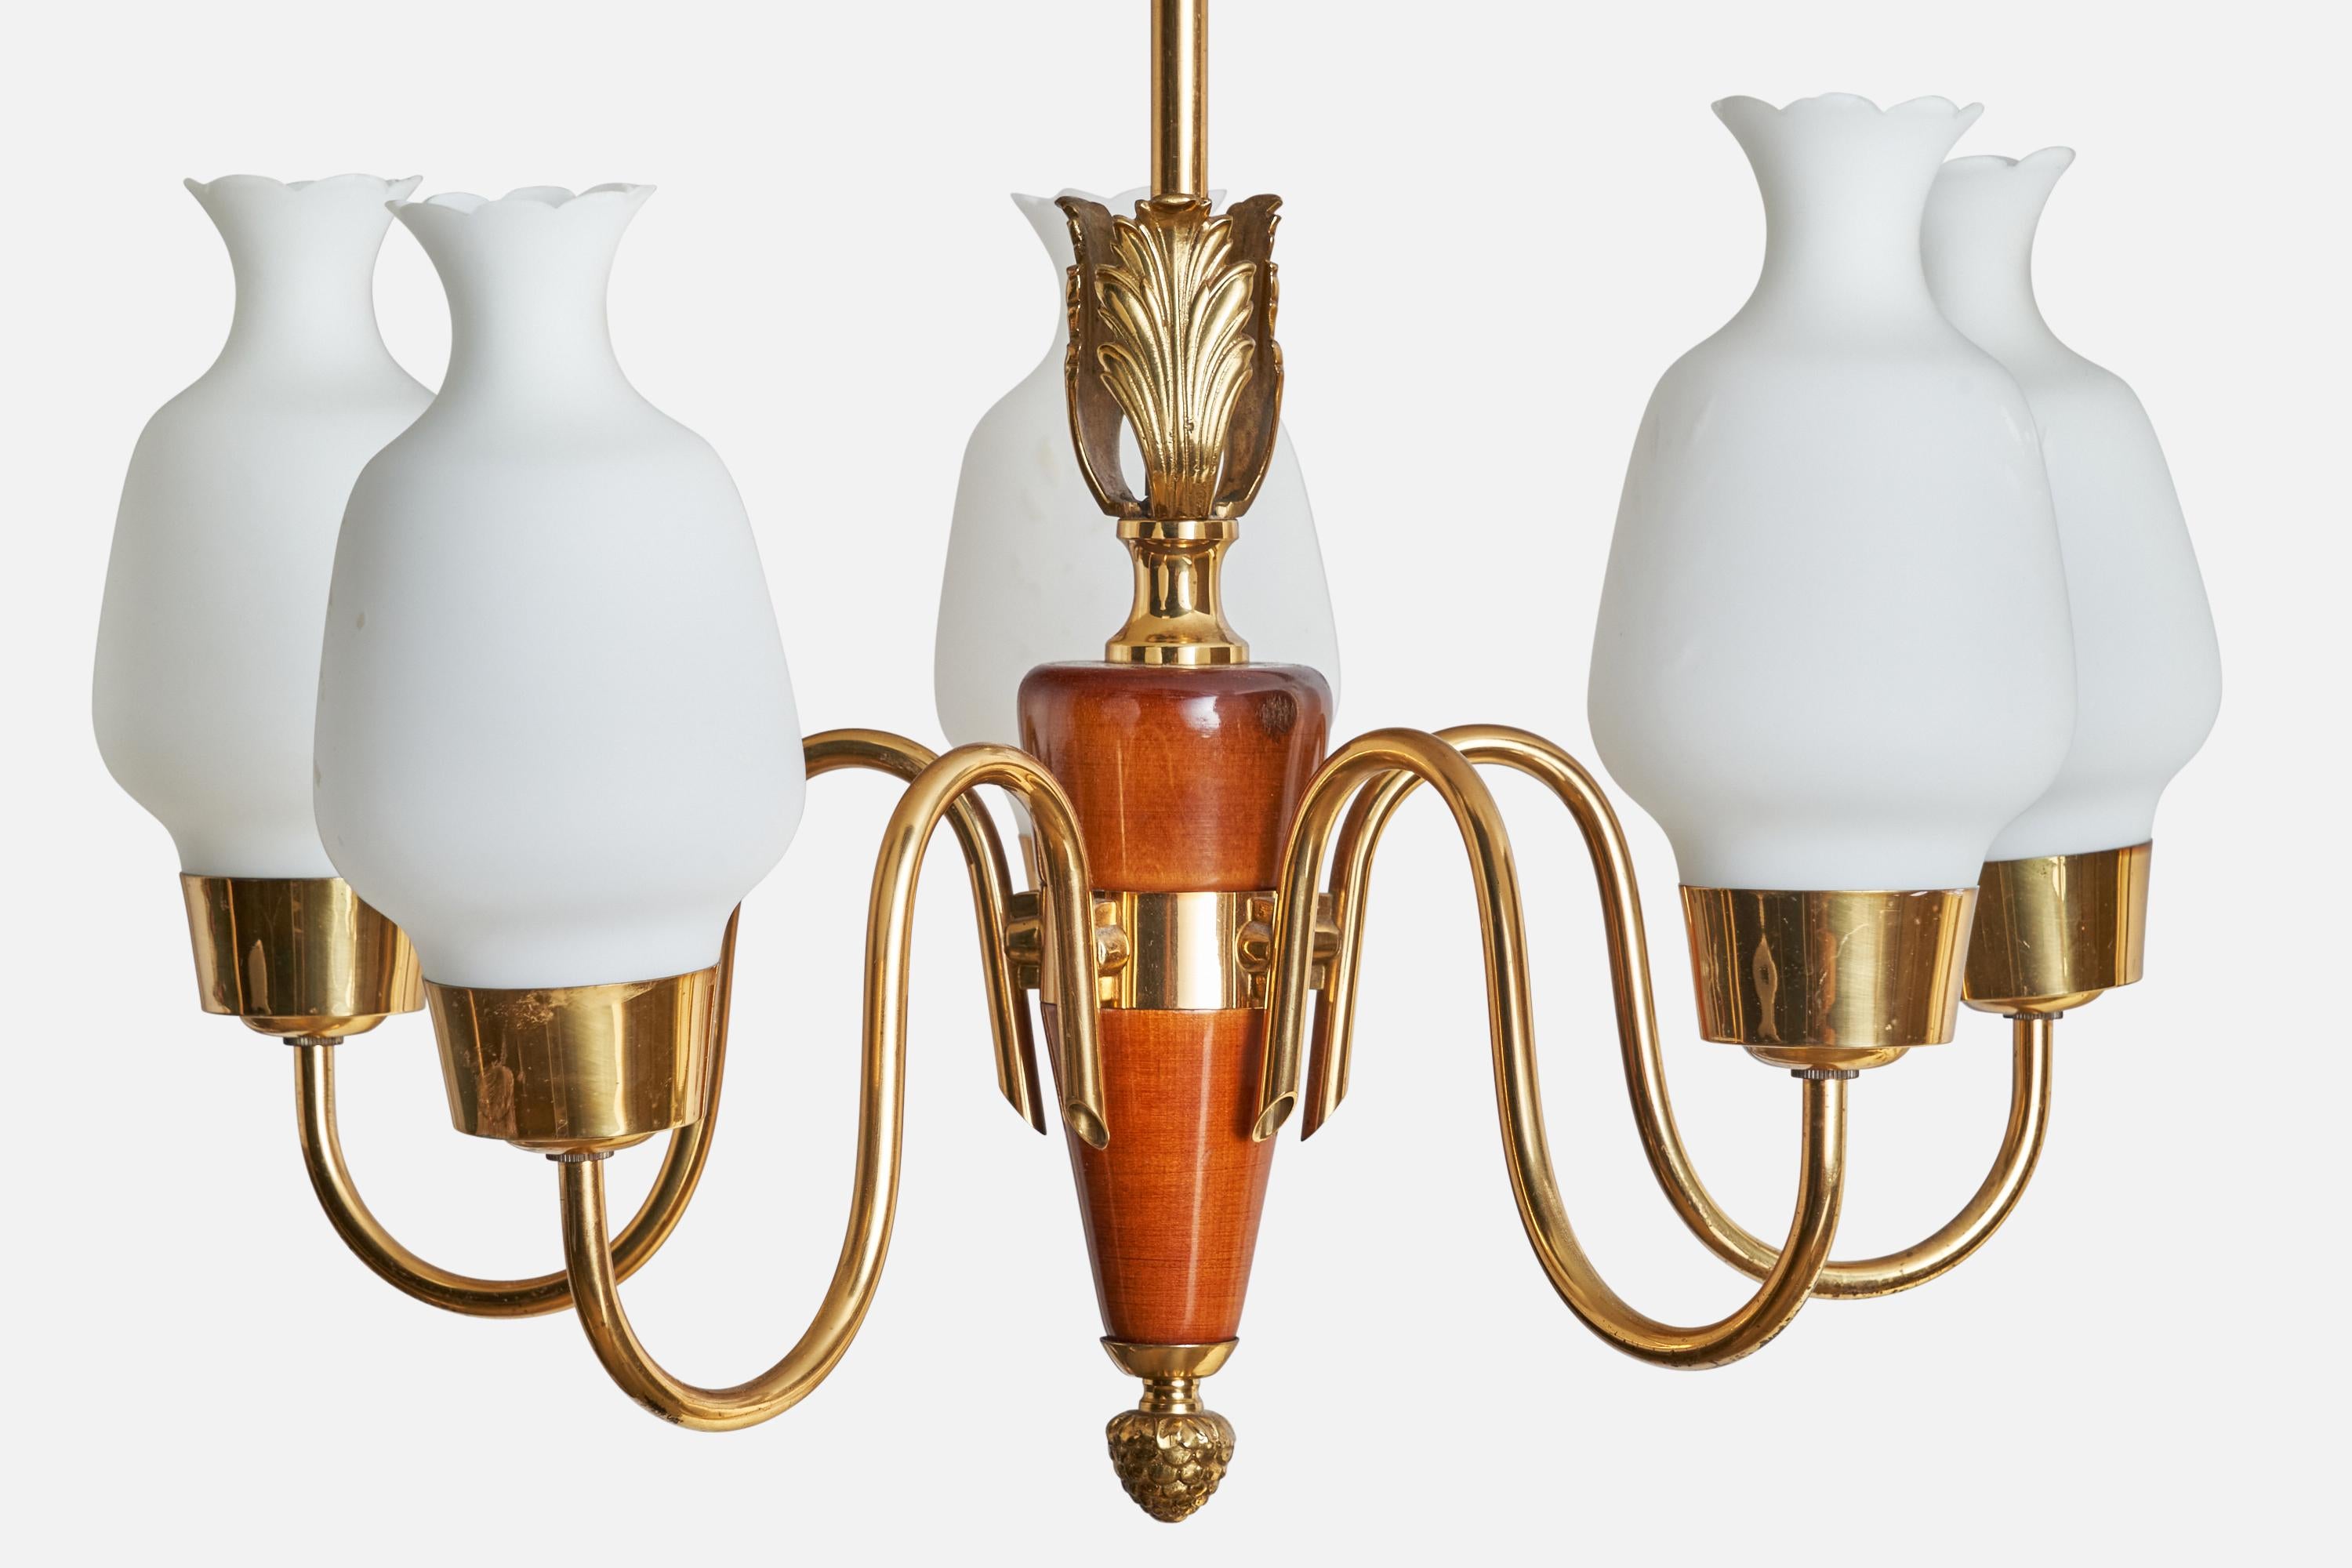 A brass, stained birch and opaline glass chandelier designed and produced in Sweden, 1940s.

Dimensions of canopy (inches): 2.5”  H x 4” Diameter
Socket takes standard E-14 bulbs. 5 sockets.There is no maximum wattage stated on the fixture. All